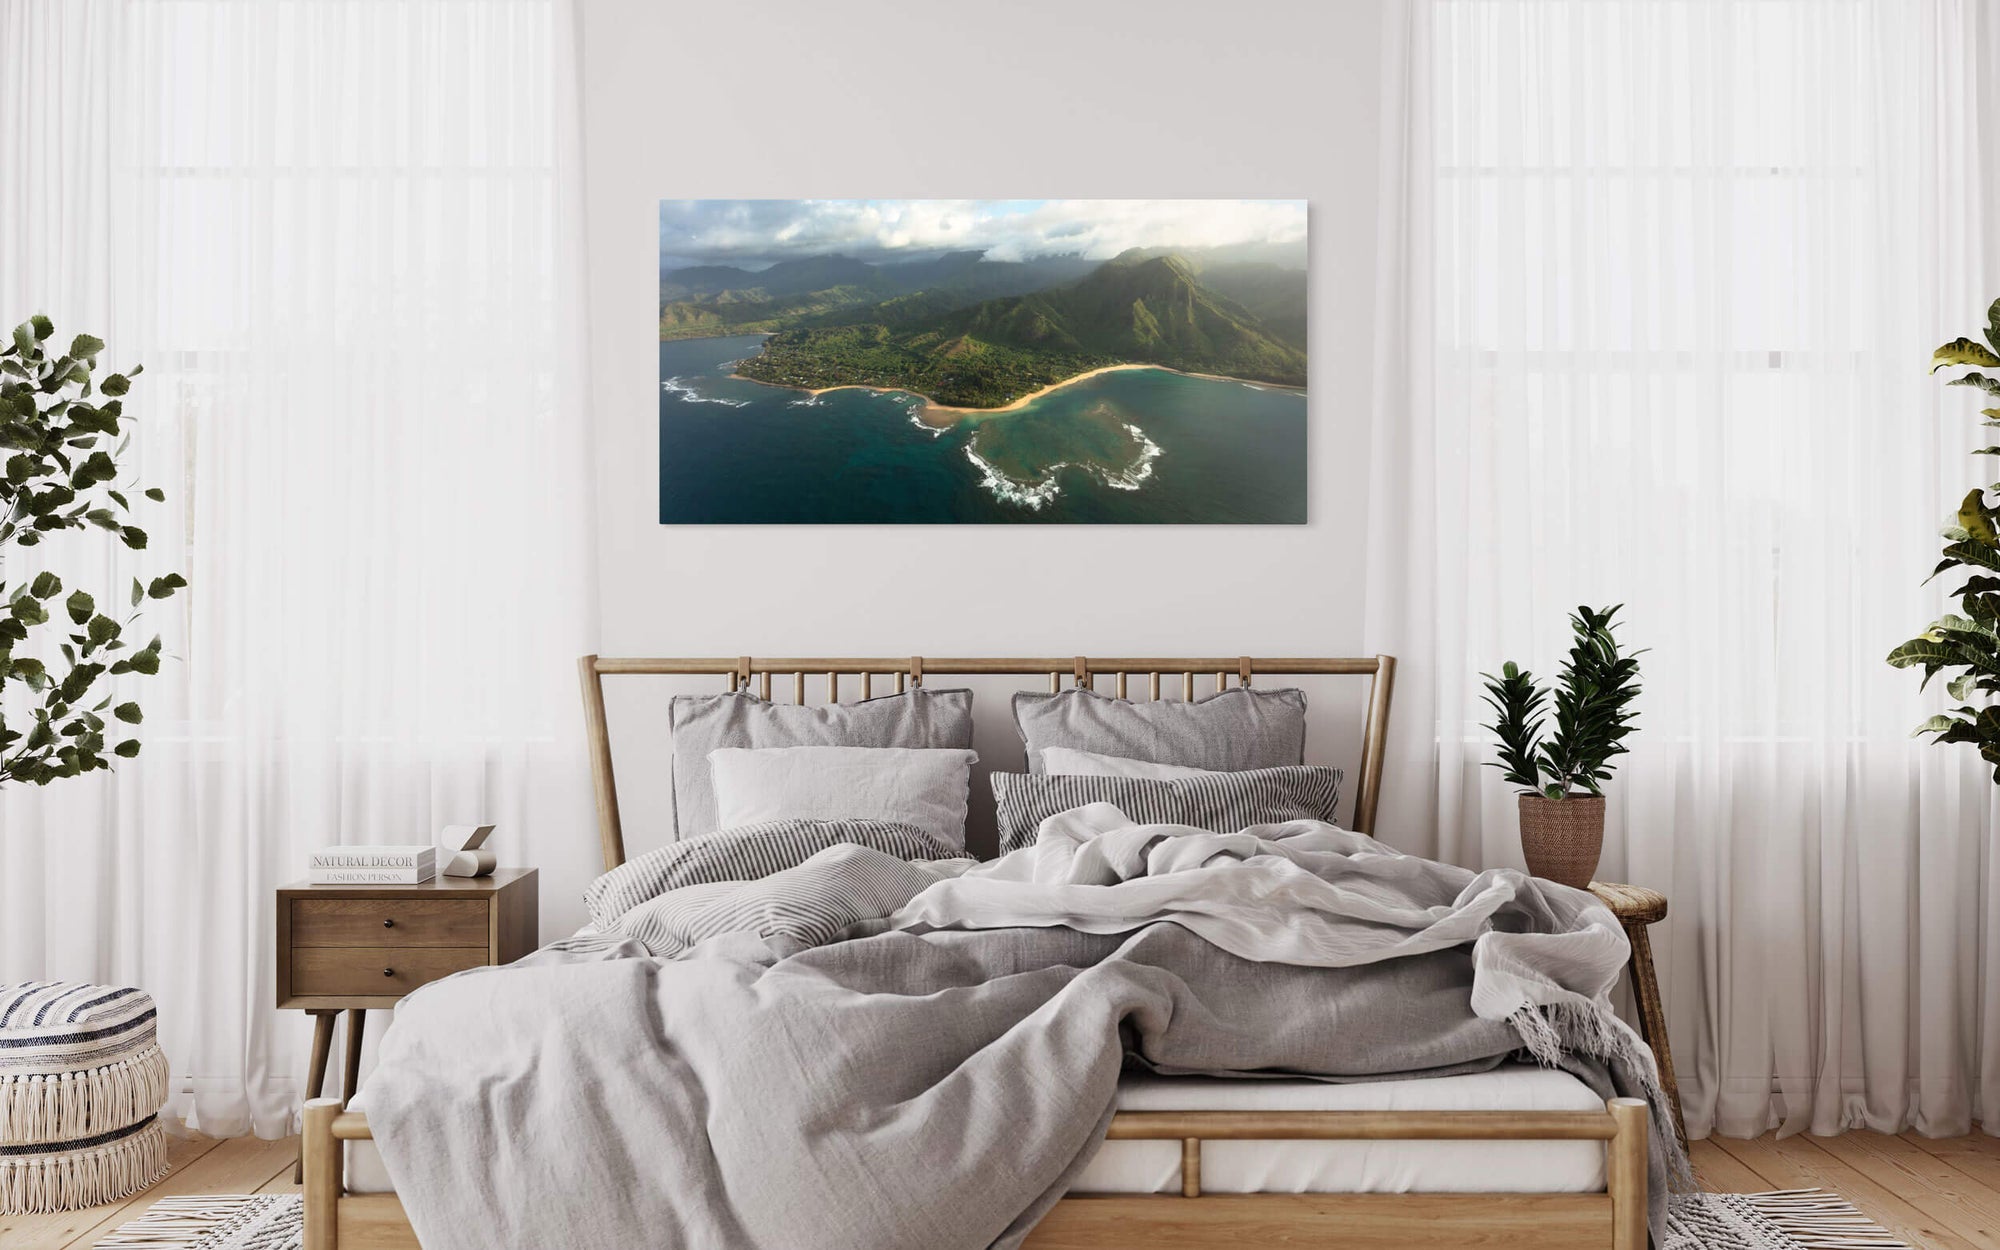 A piece of Napali Coast art showing a Ke'e Beach picture from Kauai hangs in a bedroom.